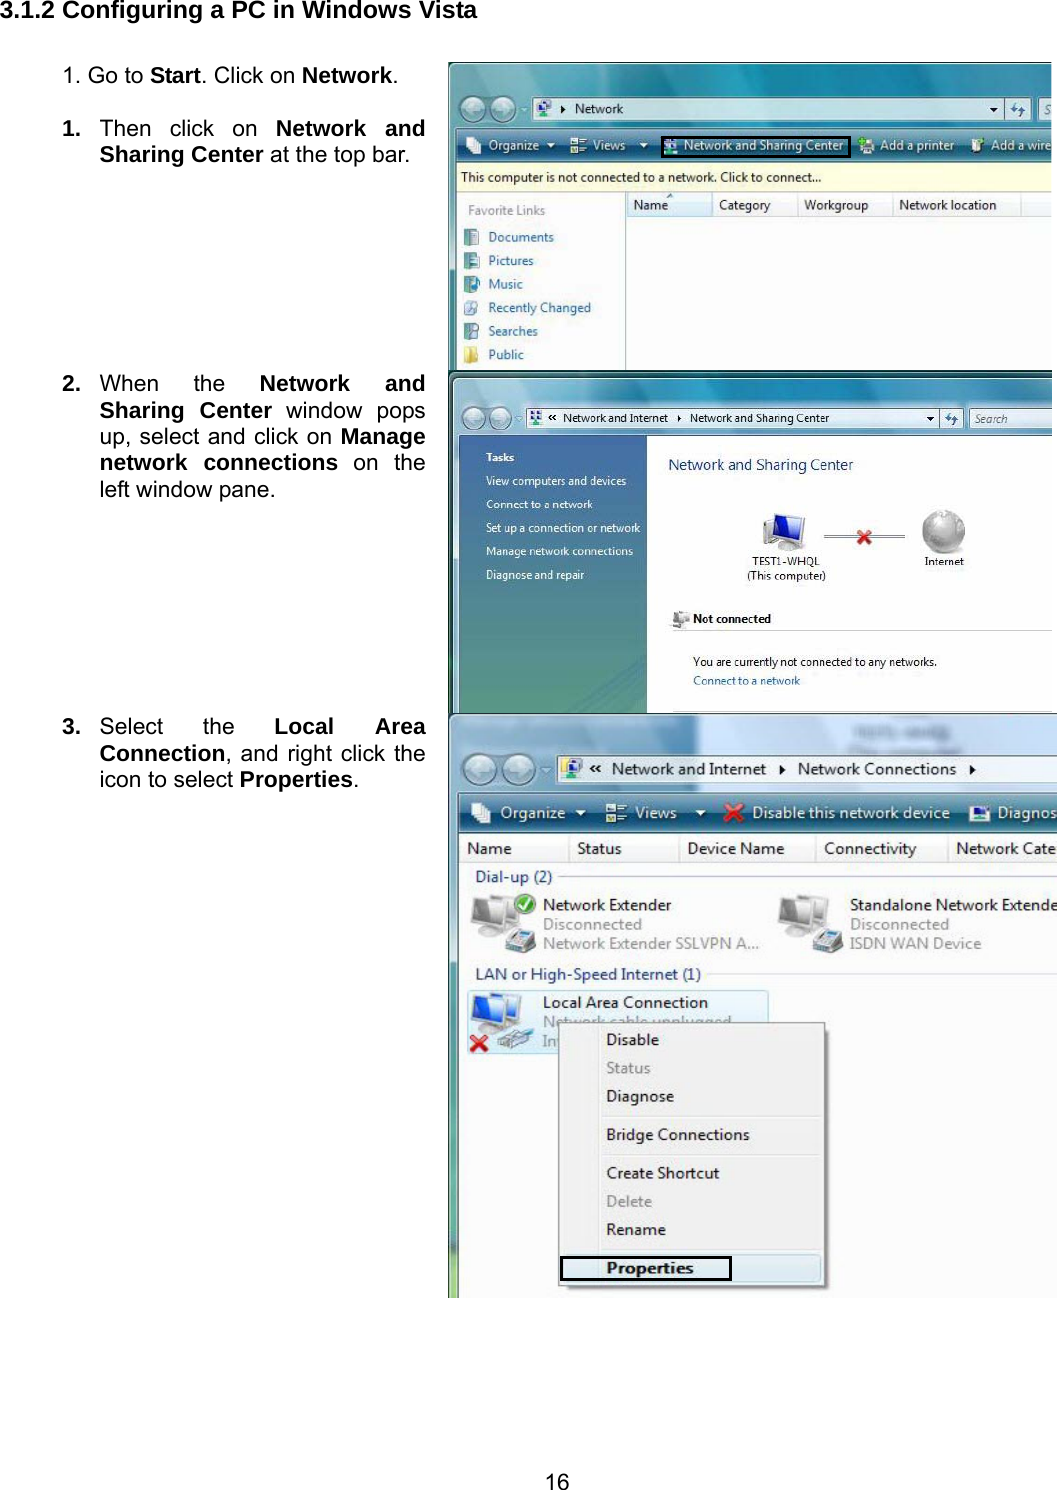 16 3.1.2 Configuring a PC in Windows Vista  1. Go to Start. Click on Network.  1.  Then click on Network and Sharing Center at the top bar. 2.  When the Network and Sharing Center window pops up, select and click on Manage network connections on the left window pane. 3.  Select the Local Area Connection, and right click the icon to select Properties. 